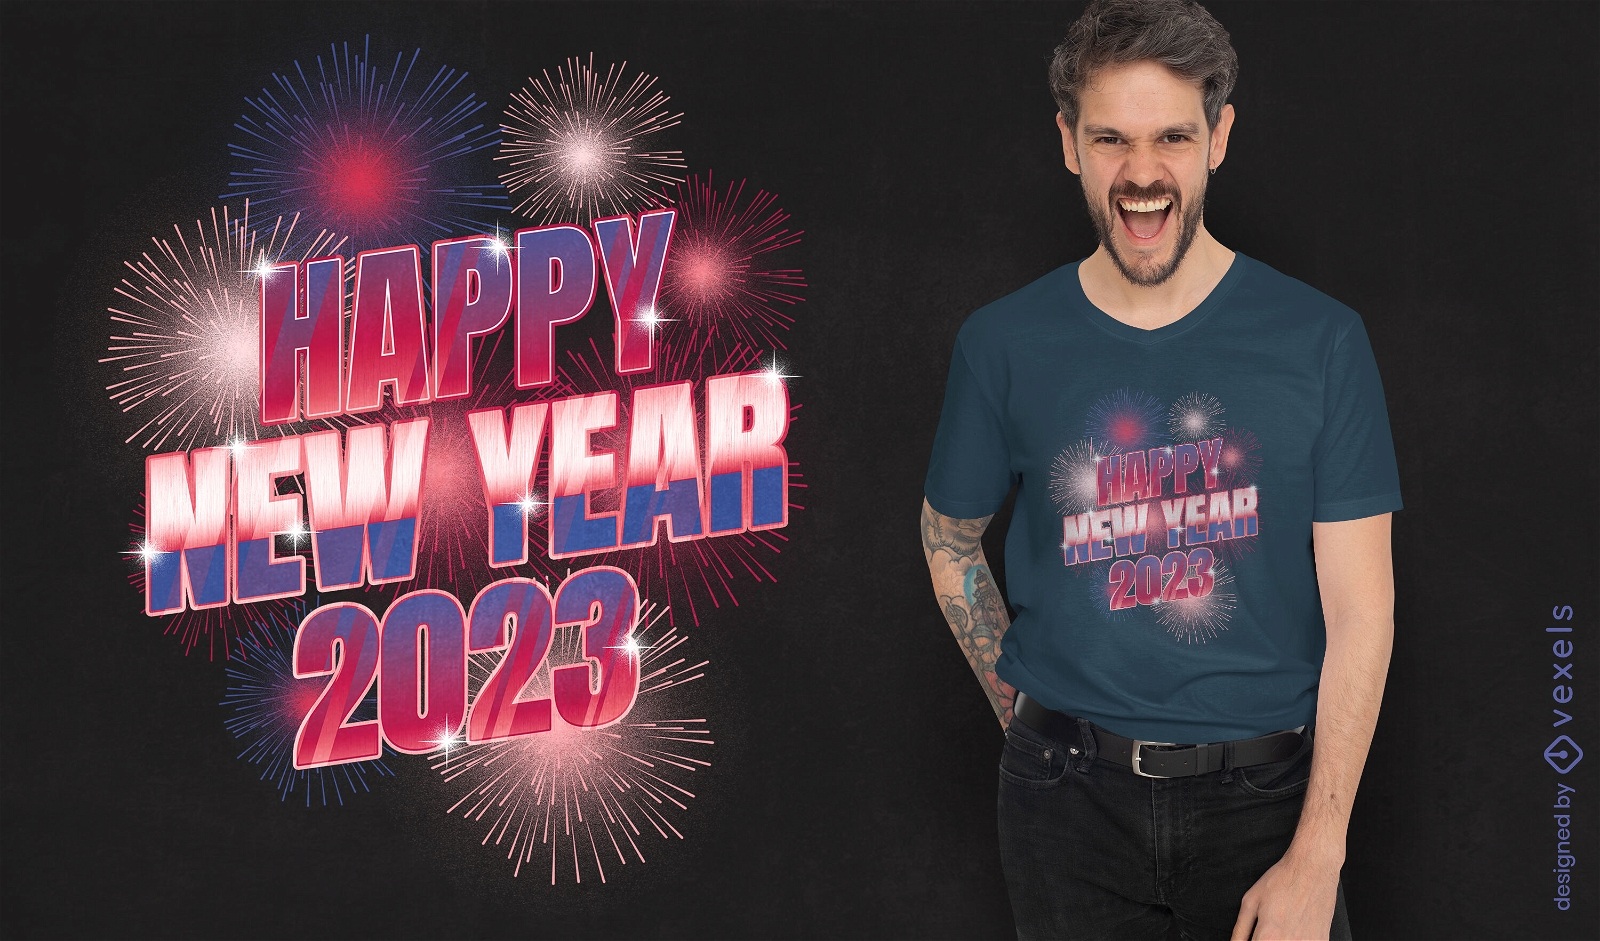 New year celebration with fireworks t-shirt psd